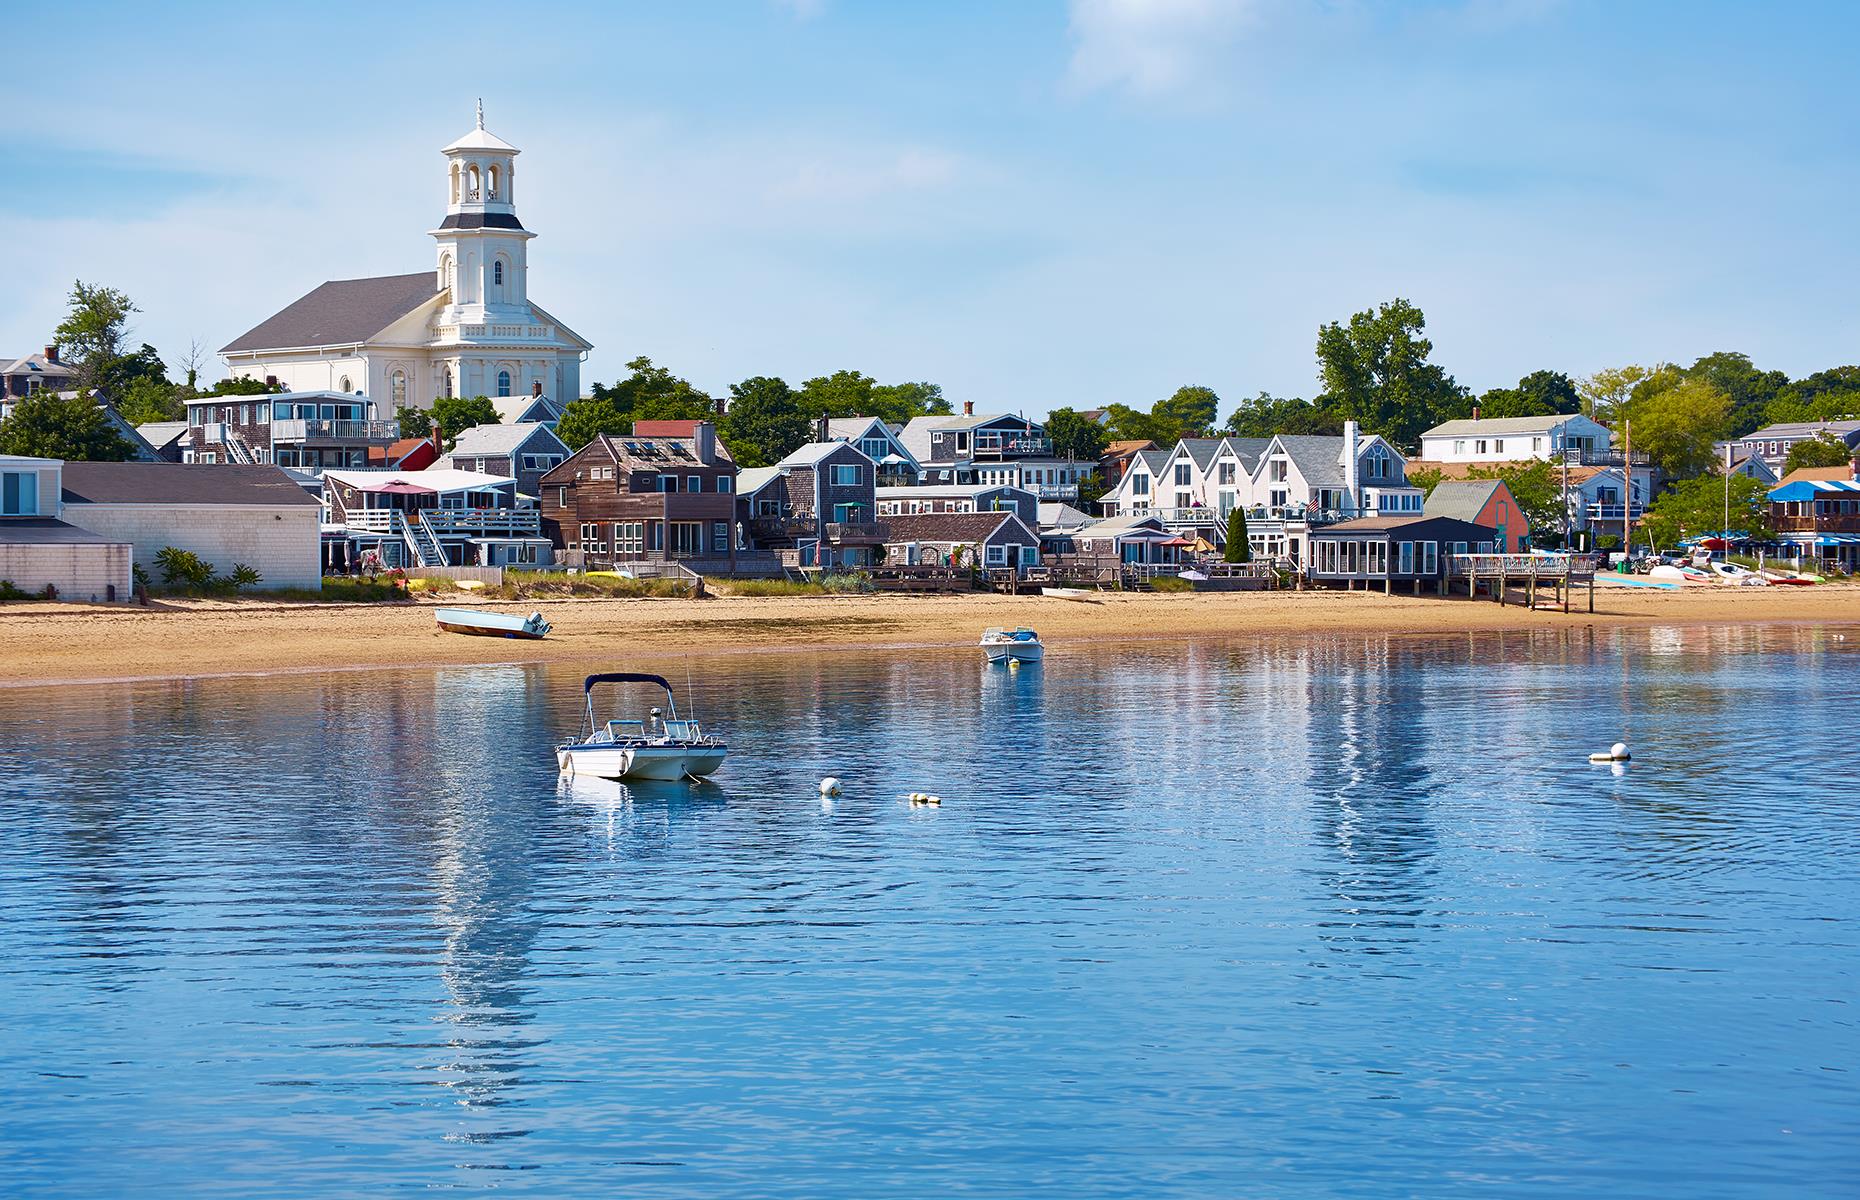 <p>Perched on the northern tip of Cape Cod, Provincetown is one of Massachusetts' and, in fact, the USA's most historic destinations. It is the site of the Mayflower's landing in 1620, and the historic event is marked by the Pilgrim Monument and the neighboring <a href="https://www.pilgrim-monument.org/">Provincetown Museum</a>, which currently remains closed. Each summer and autumn, the town celebrates its maritime history by <a href="https://ptowntourism.com/articles/see-the-tall-ships/">hosting a number of tall ships </a>– most of them offer a tour of the ship or even sailing excursions. <a href="https://www.mass.gov/forms/massachusetts-travel-form">Make sure to check</a> Massachusetts travel restrictions before heading out.</p>